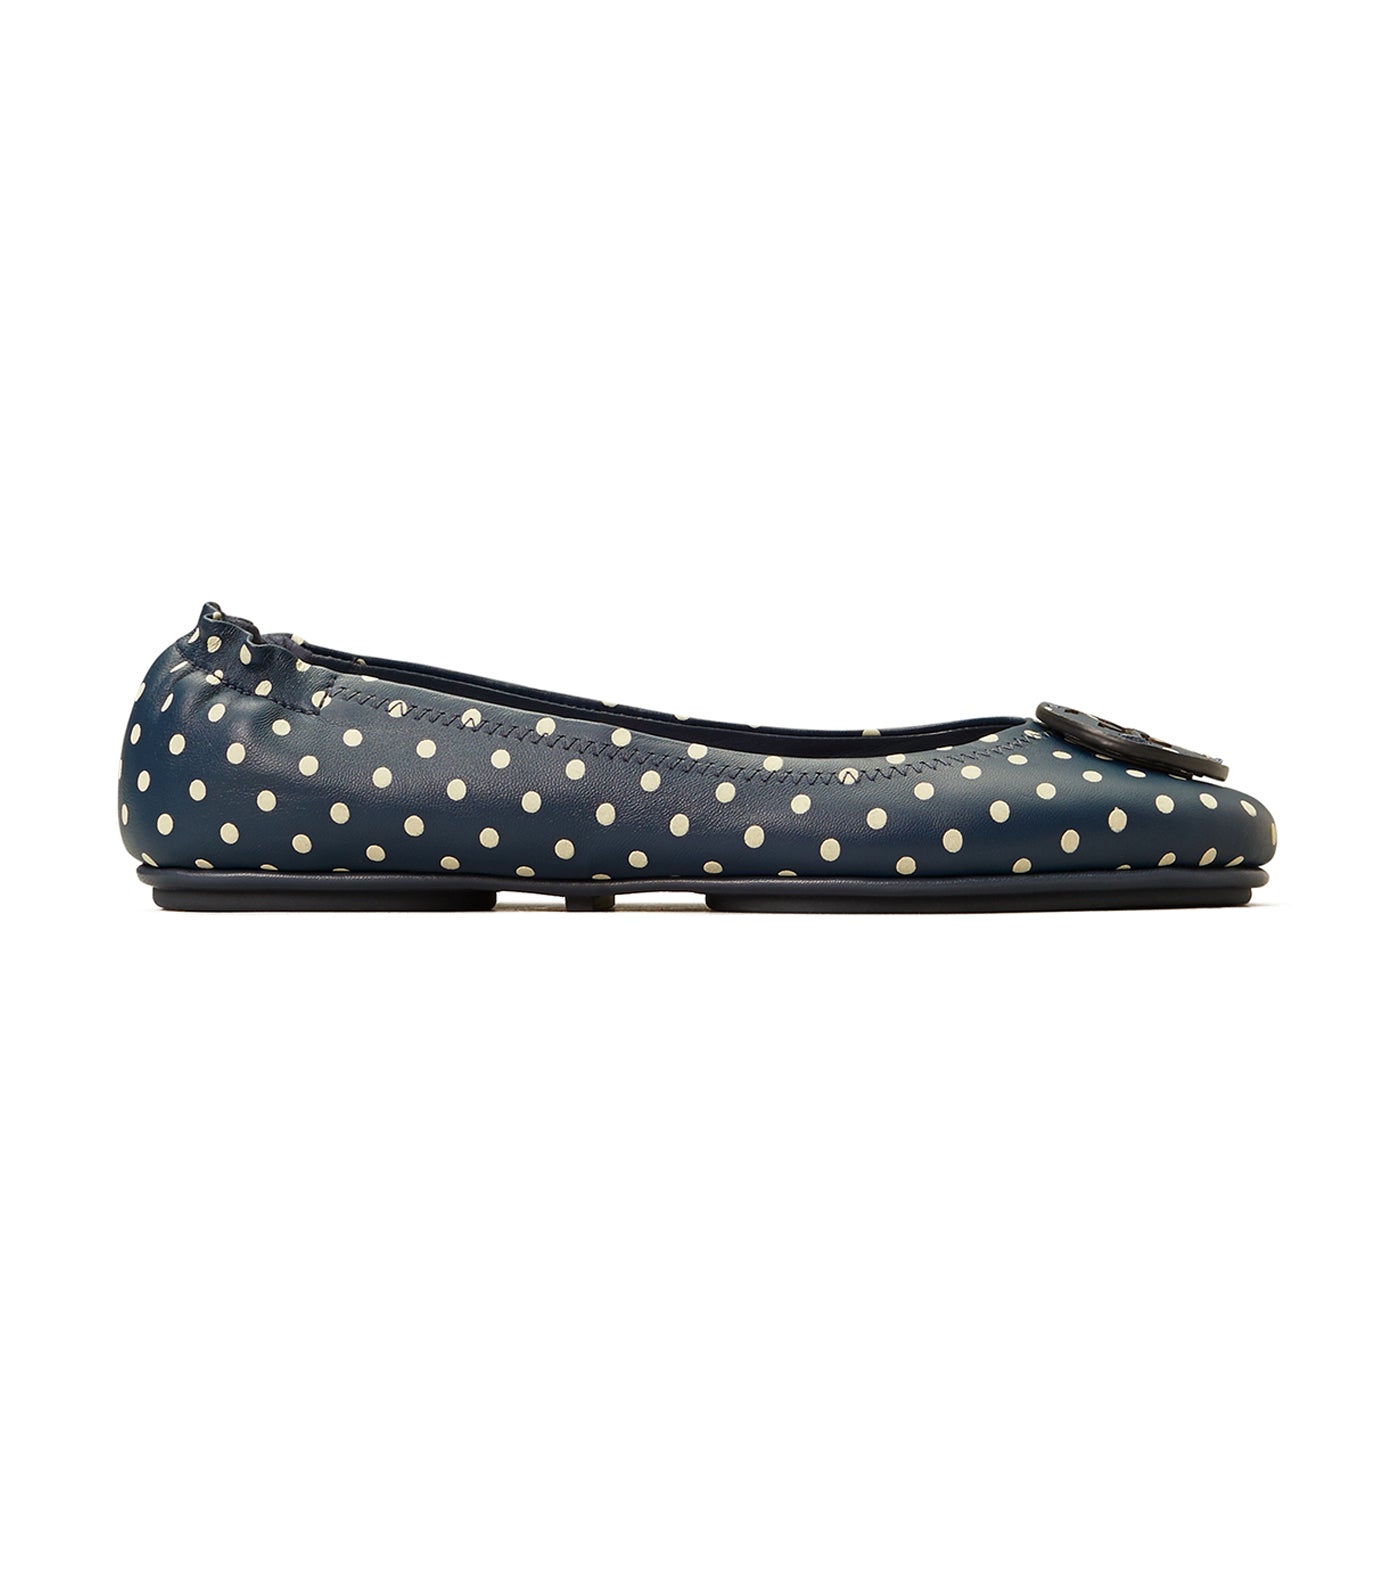 tory burch minnie travel ballet flat printed leather